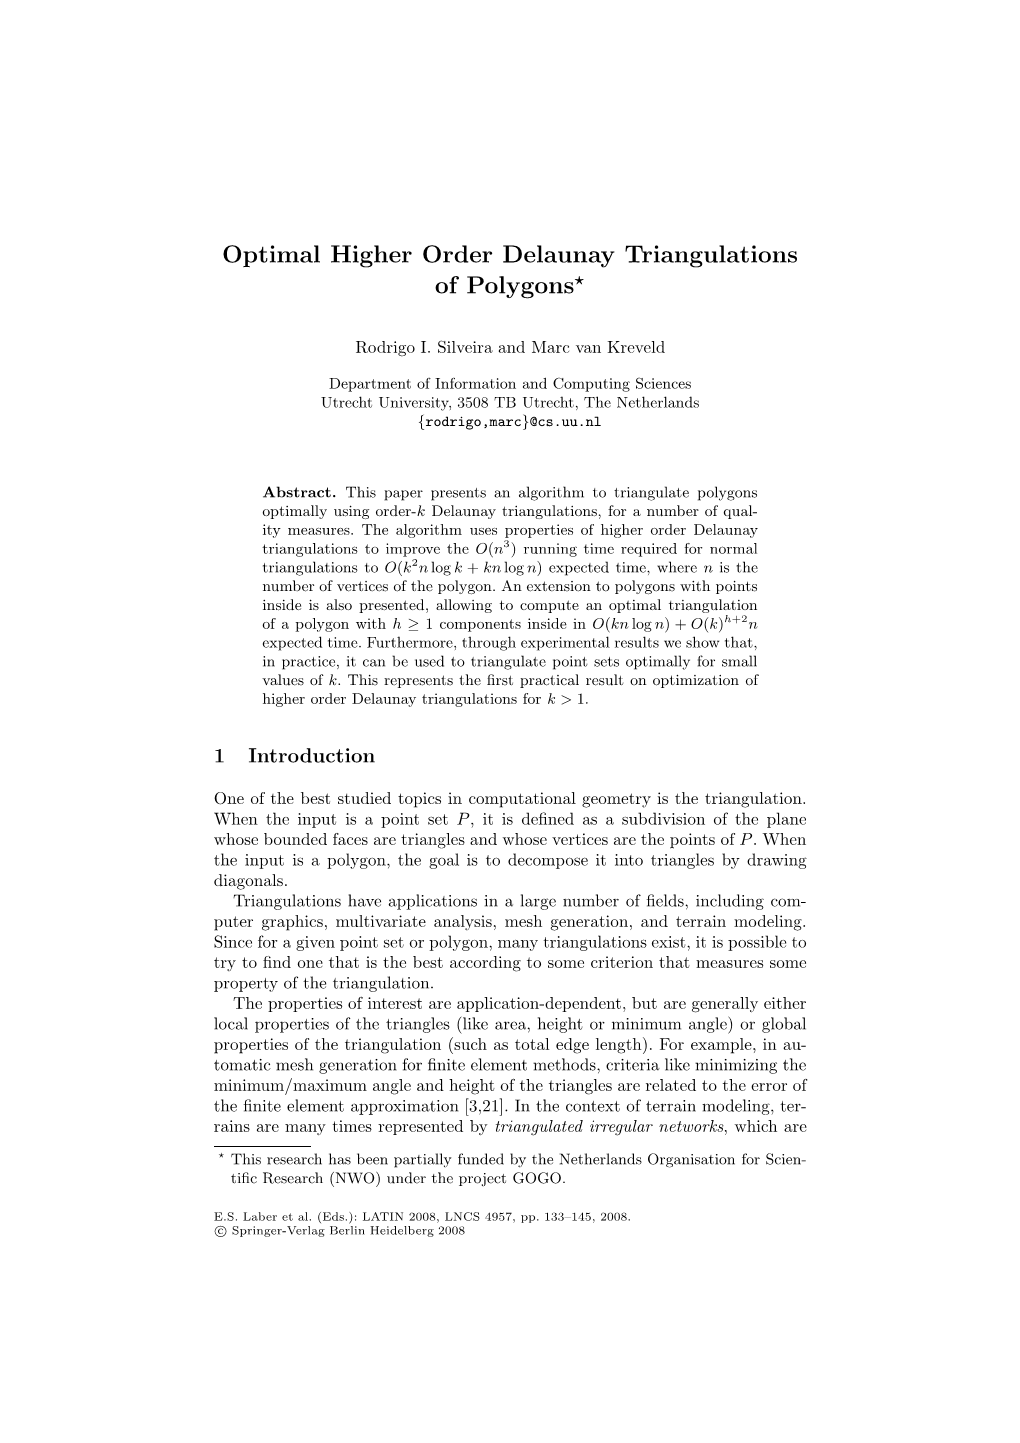 Optimal Higher Order Delaunay Triangulations of Polygons*